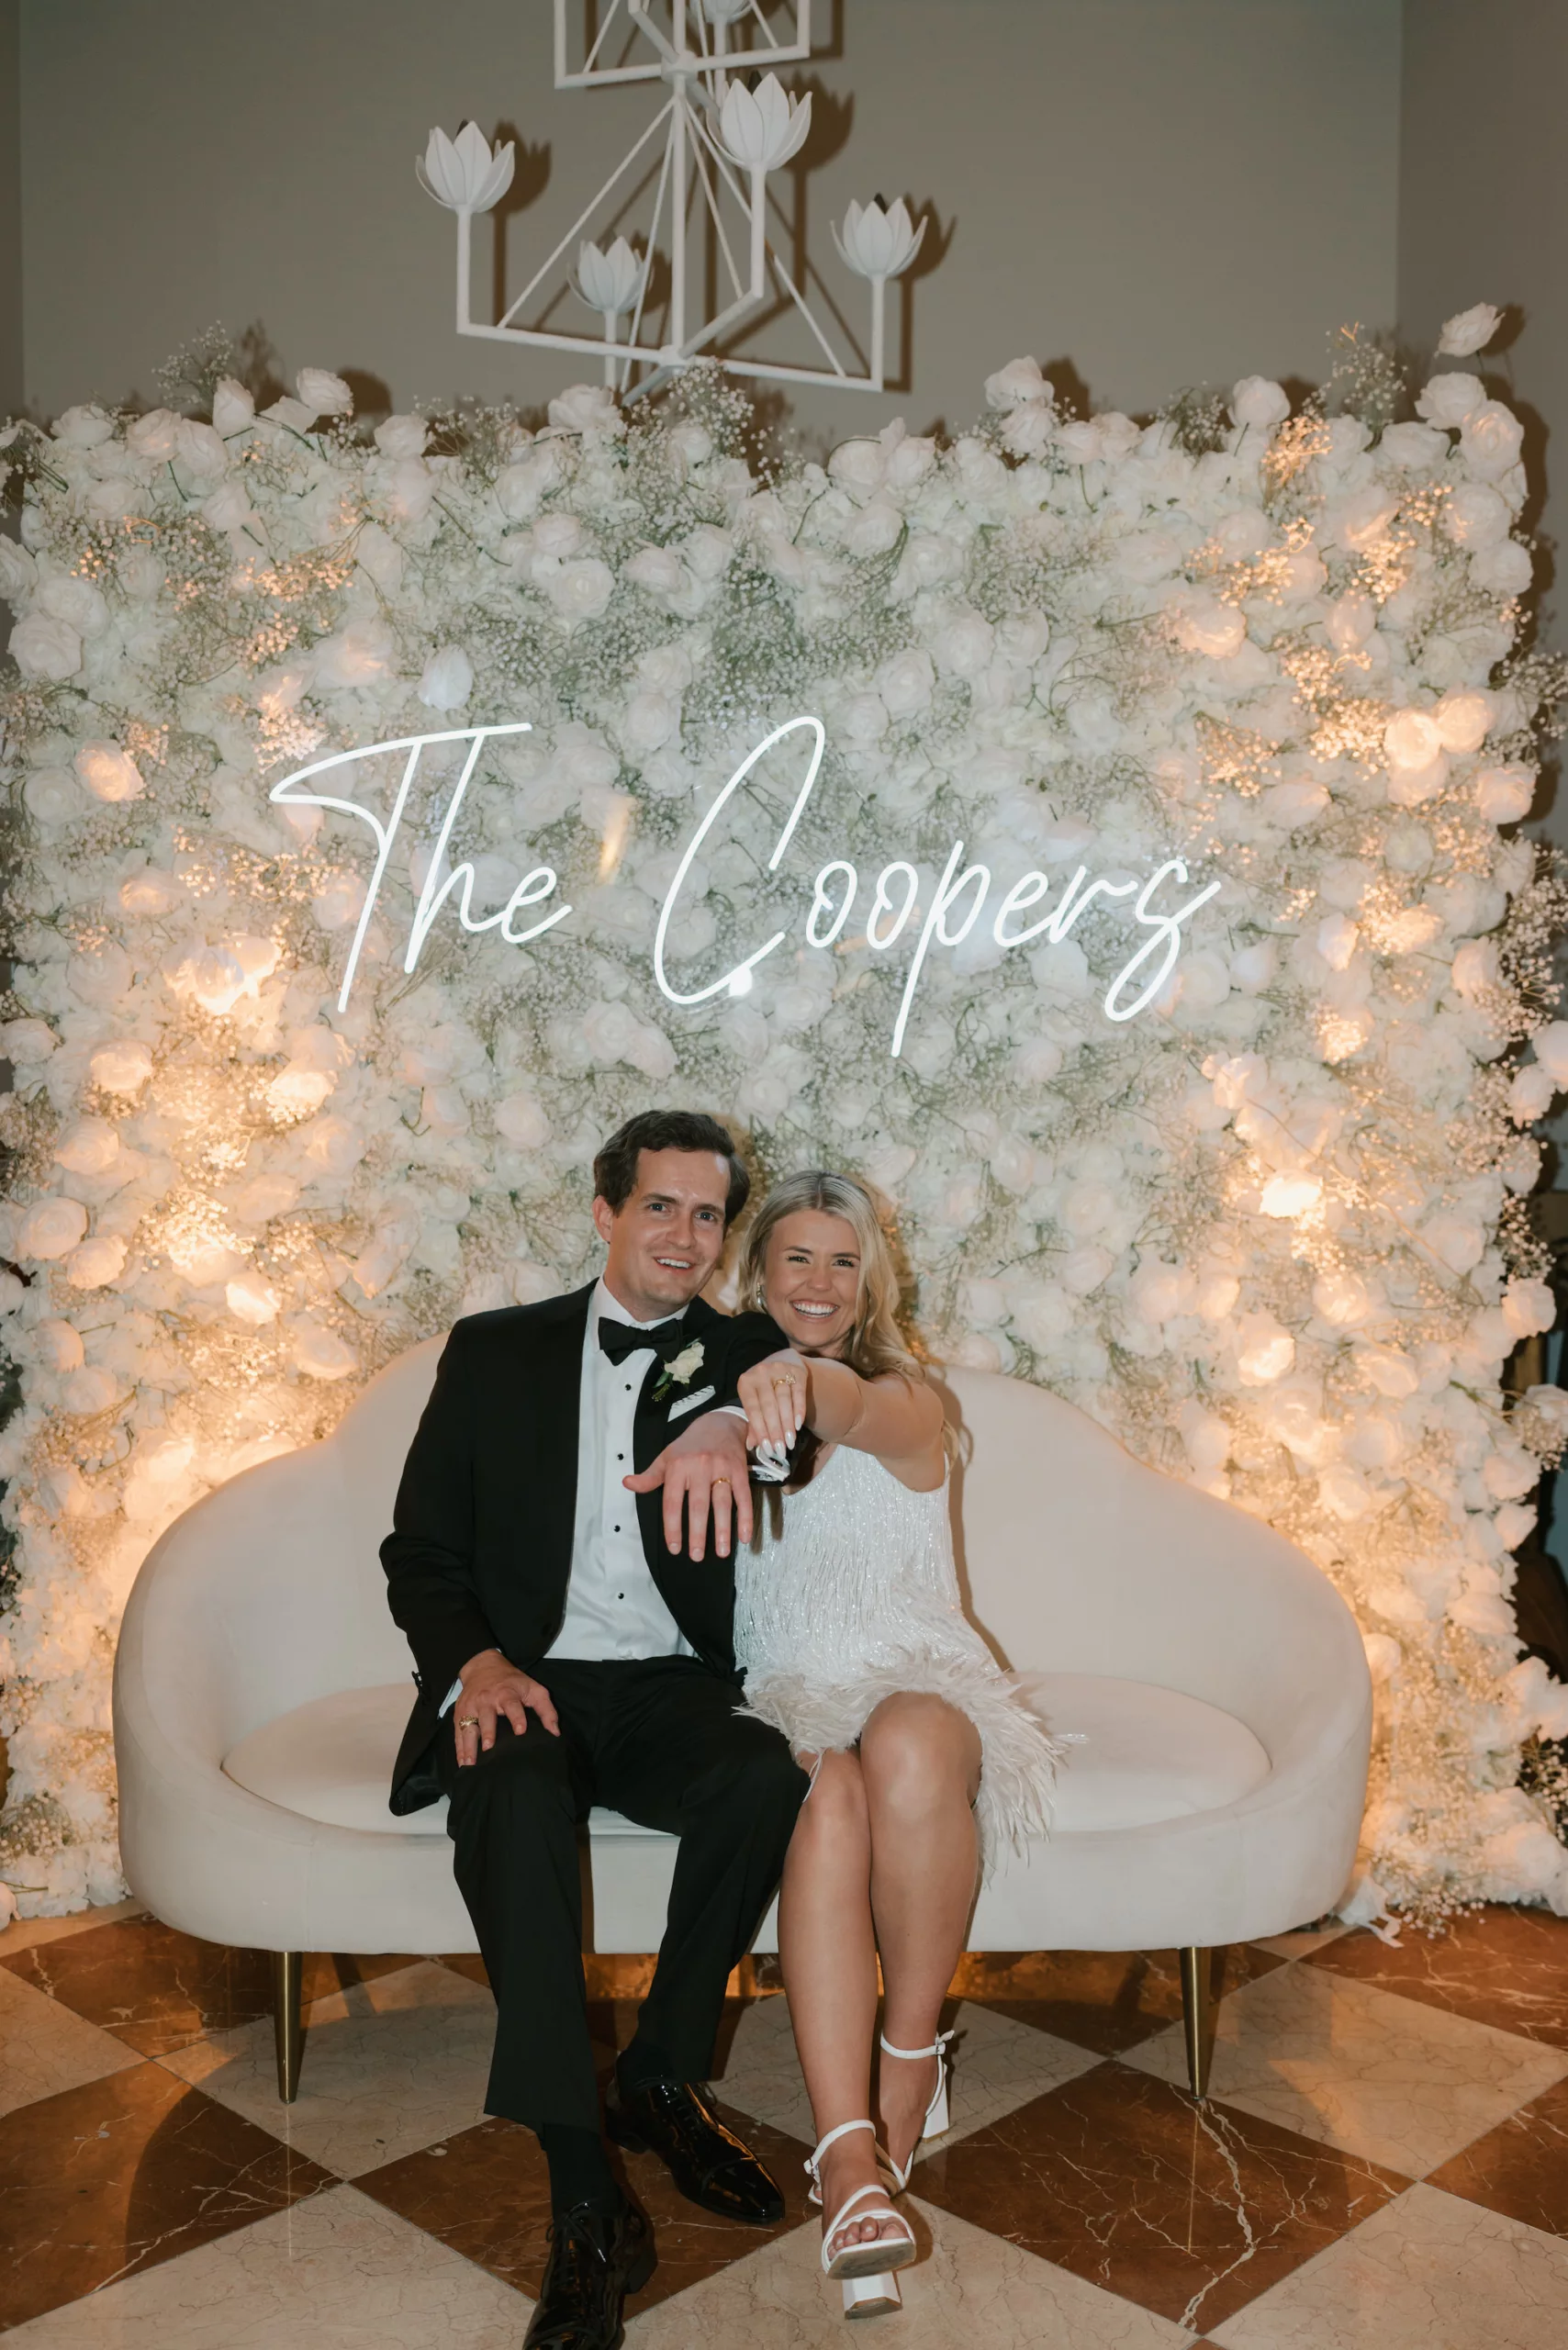 Classic Wedding Reception Decor Ideas | Custom Neon Sign with White Rose and Baby's Breath Flower Wall Backdrop | White Love Seat Inspiration